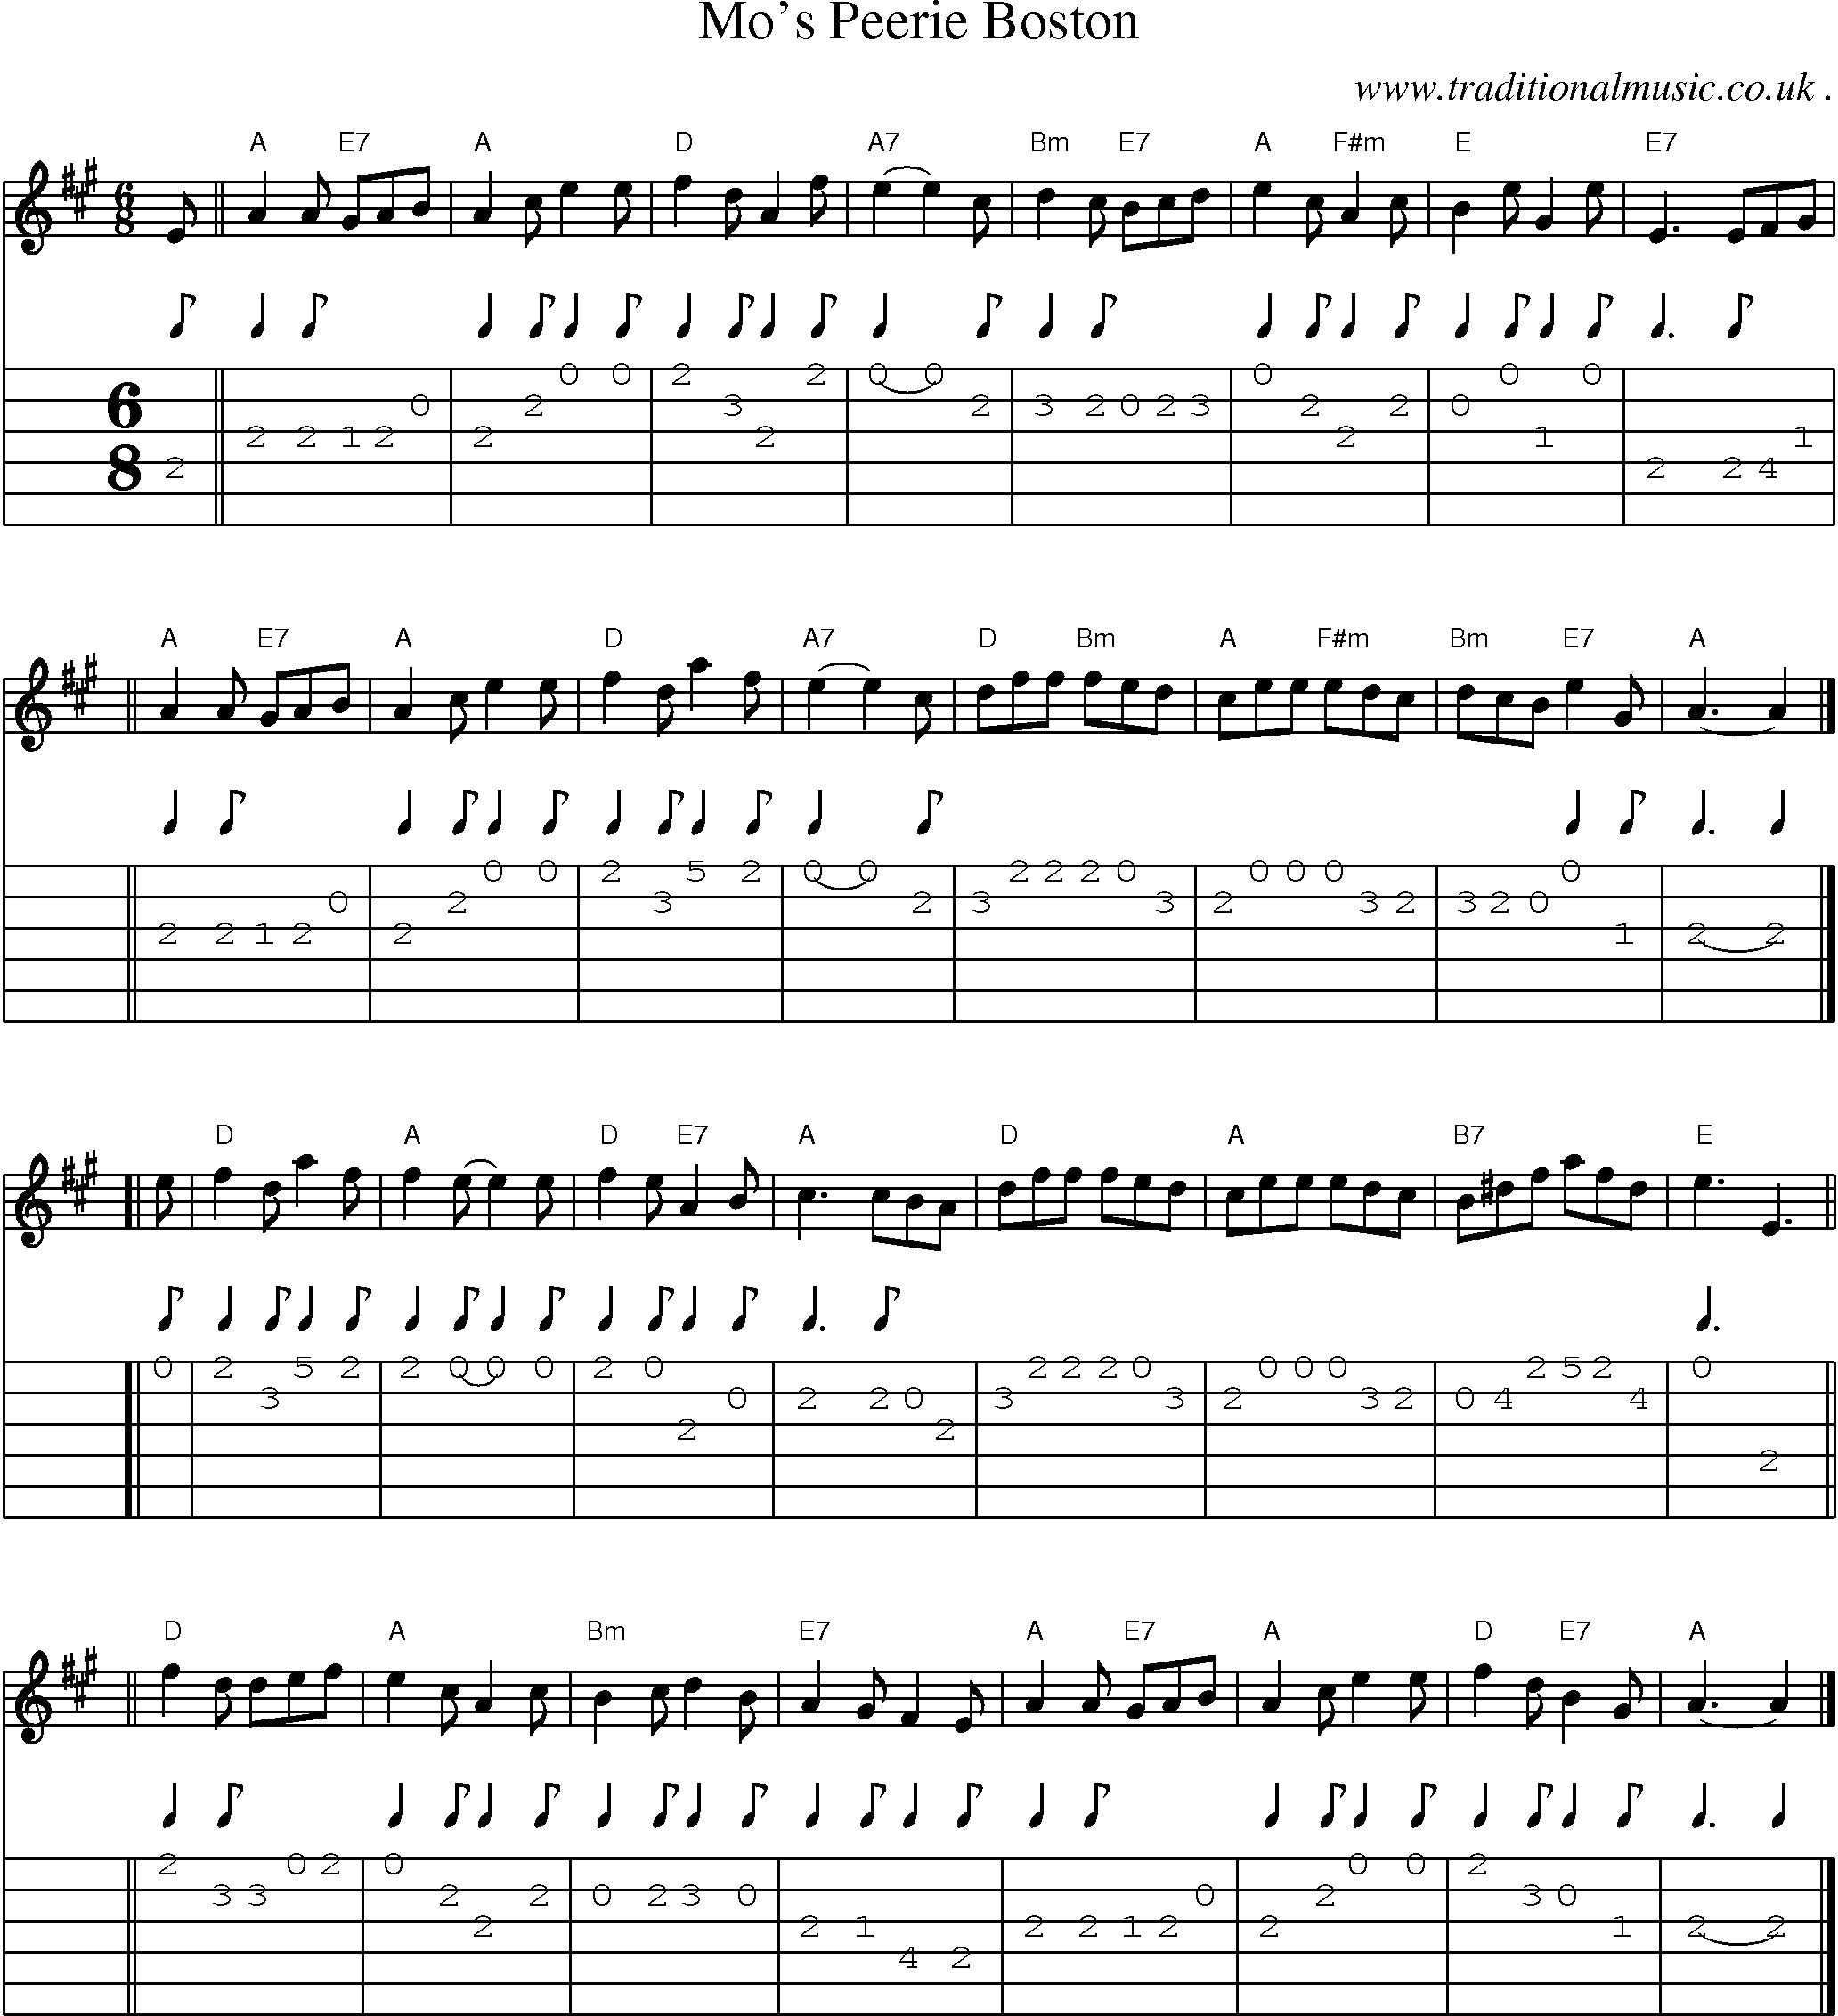 Sheet-music  score, Chords and Guitar Tabs for Mos Peerie Boston